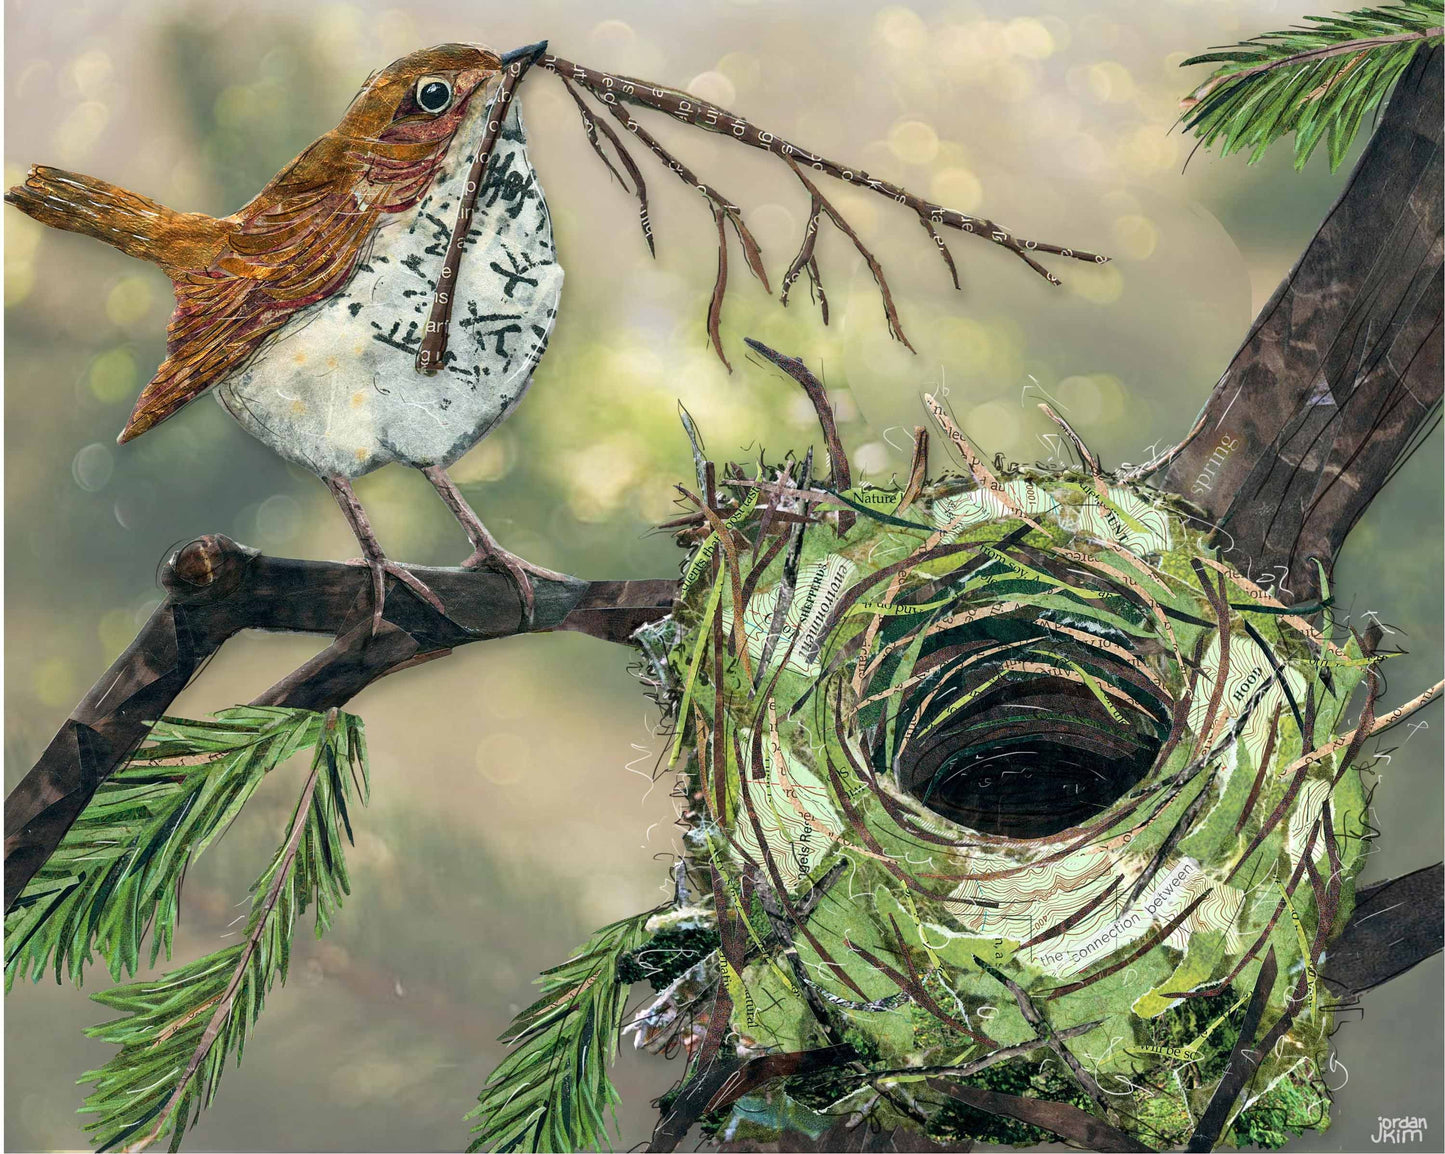 Greeting Card of a Paper Collage of a Swainson's Thrush bird building a nest in a fir tree - Blank Inside